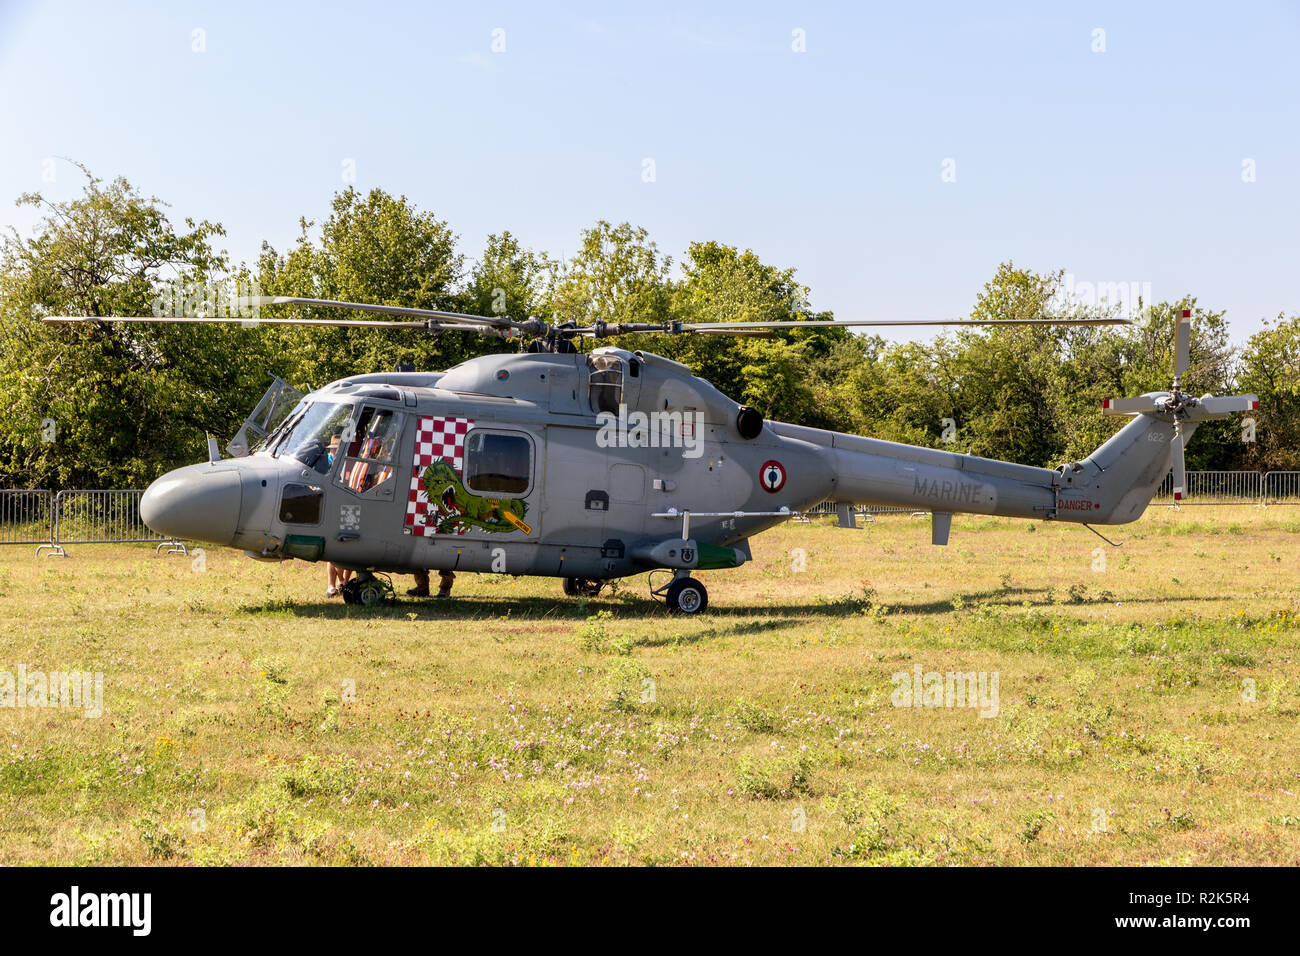 NANCY, FRANCE - JUL 1, 2018: French Navy Westland Lynx helicopter in a grass field at Nancy Airbase. Stock Photo